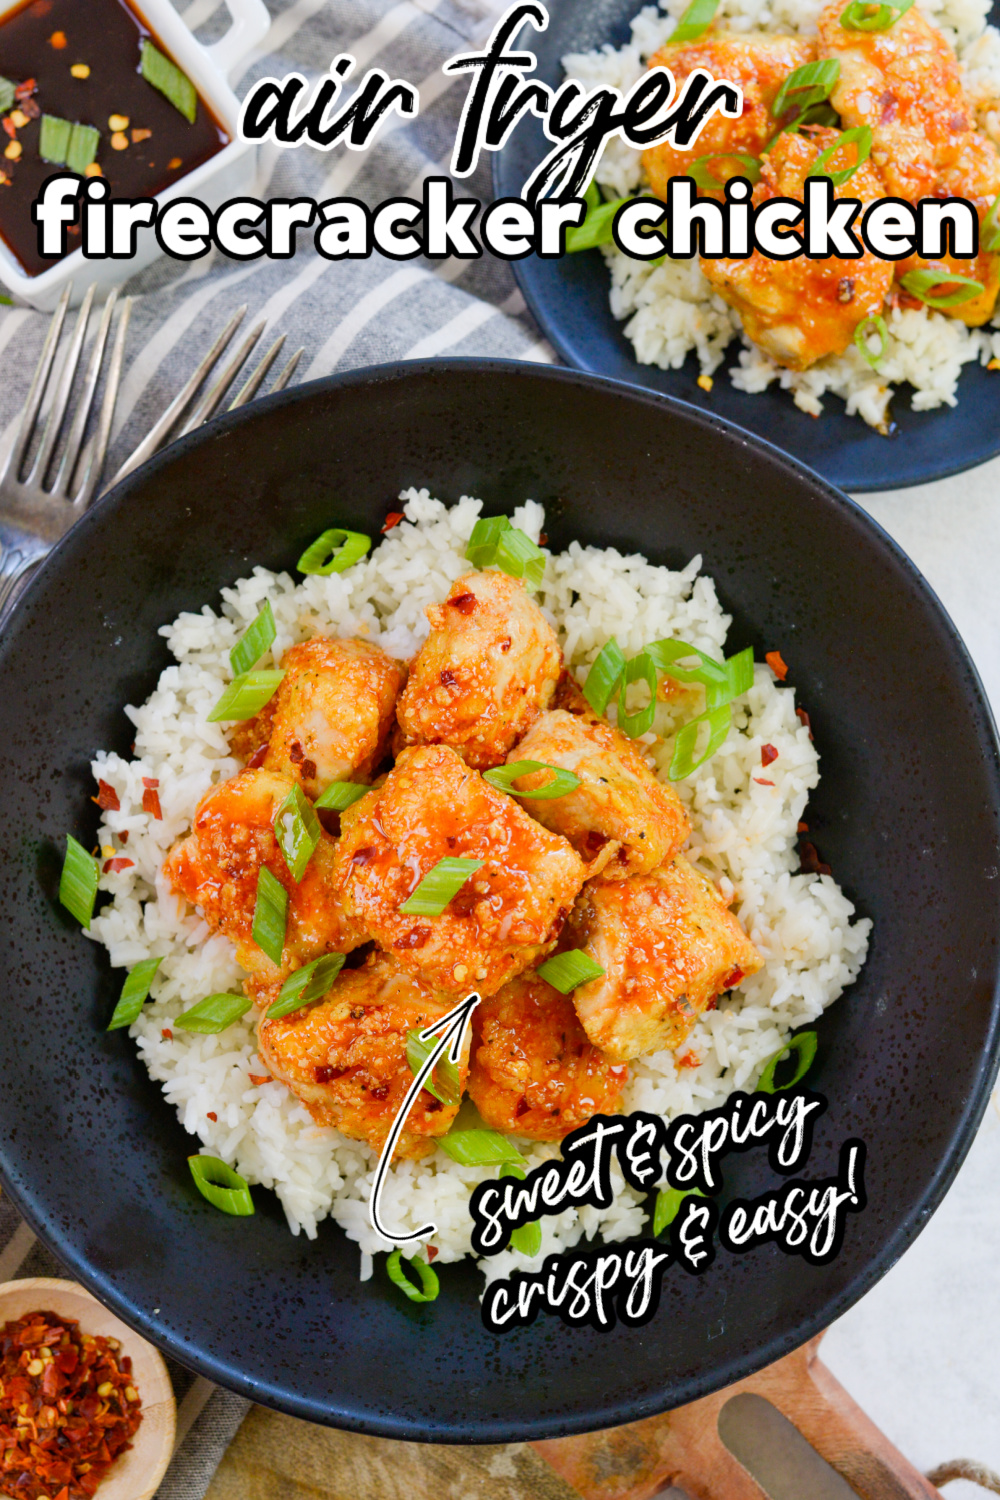 This firecracker chicken recipe is ready in just over 10 minutes!  Cook the homemade sauce while the air fryer is making your chicken nice and crispy!